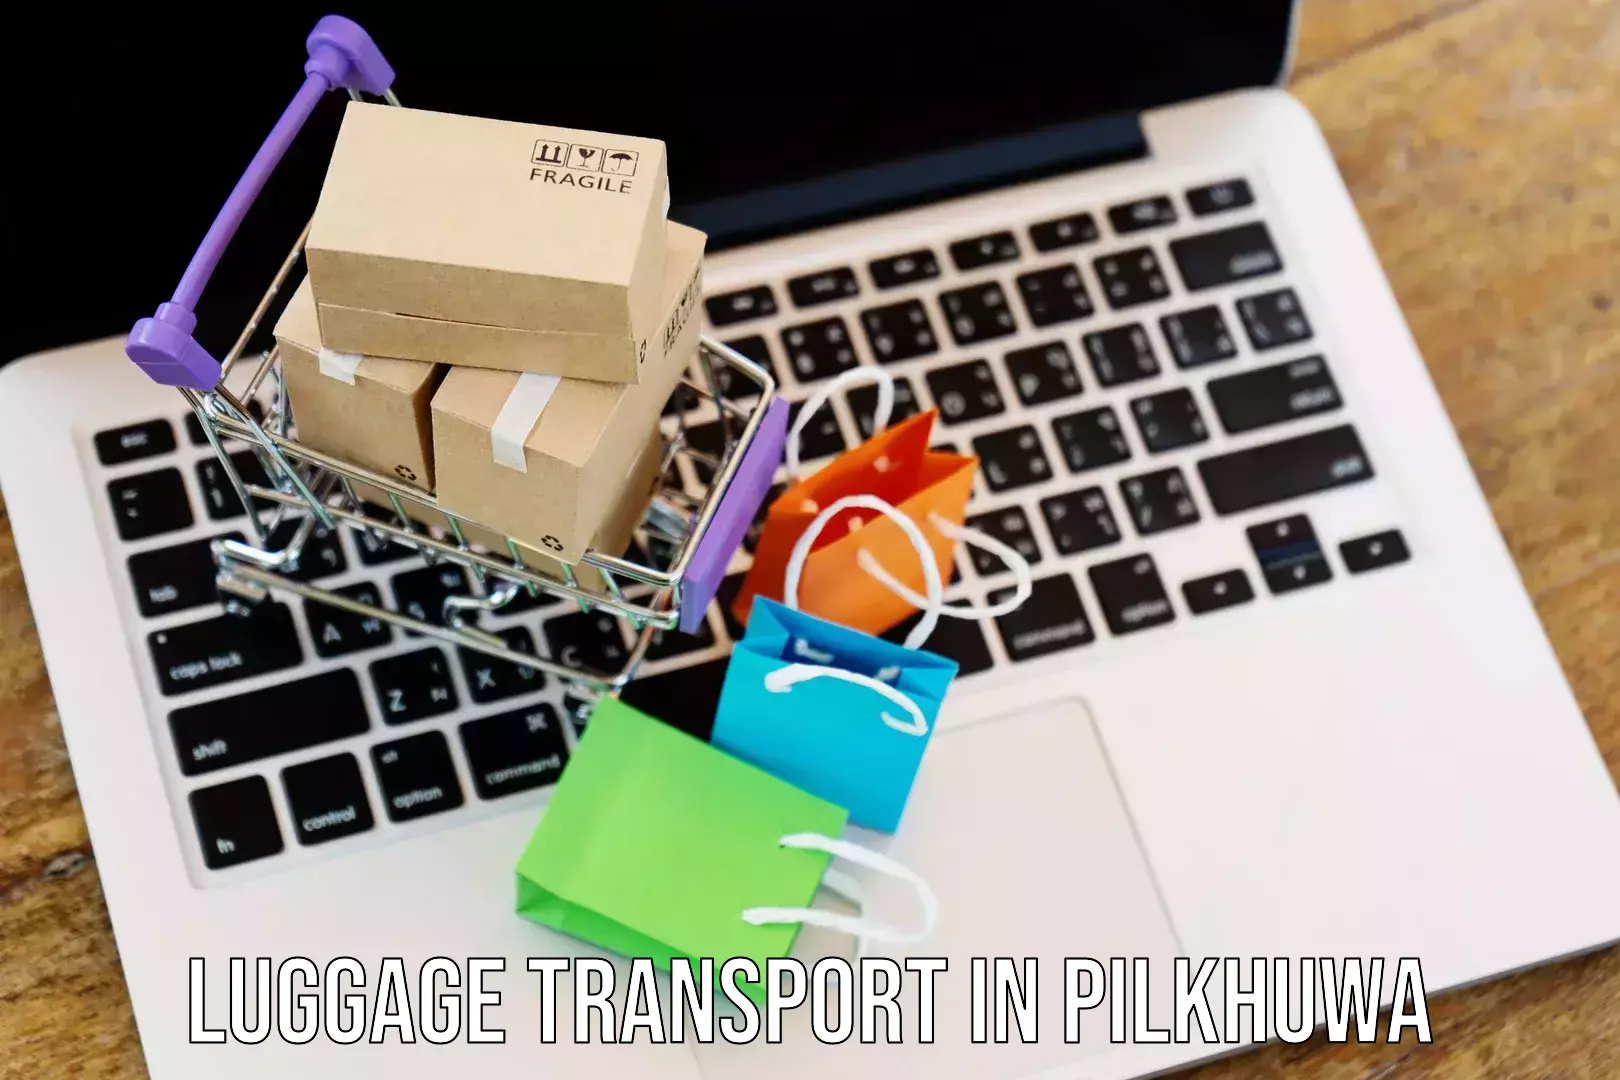 Luggage transport rates in Pilkhuwa